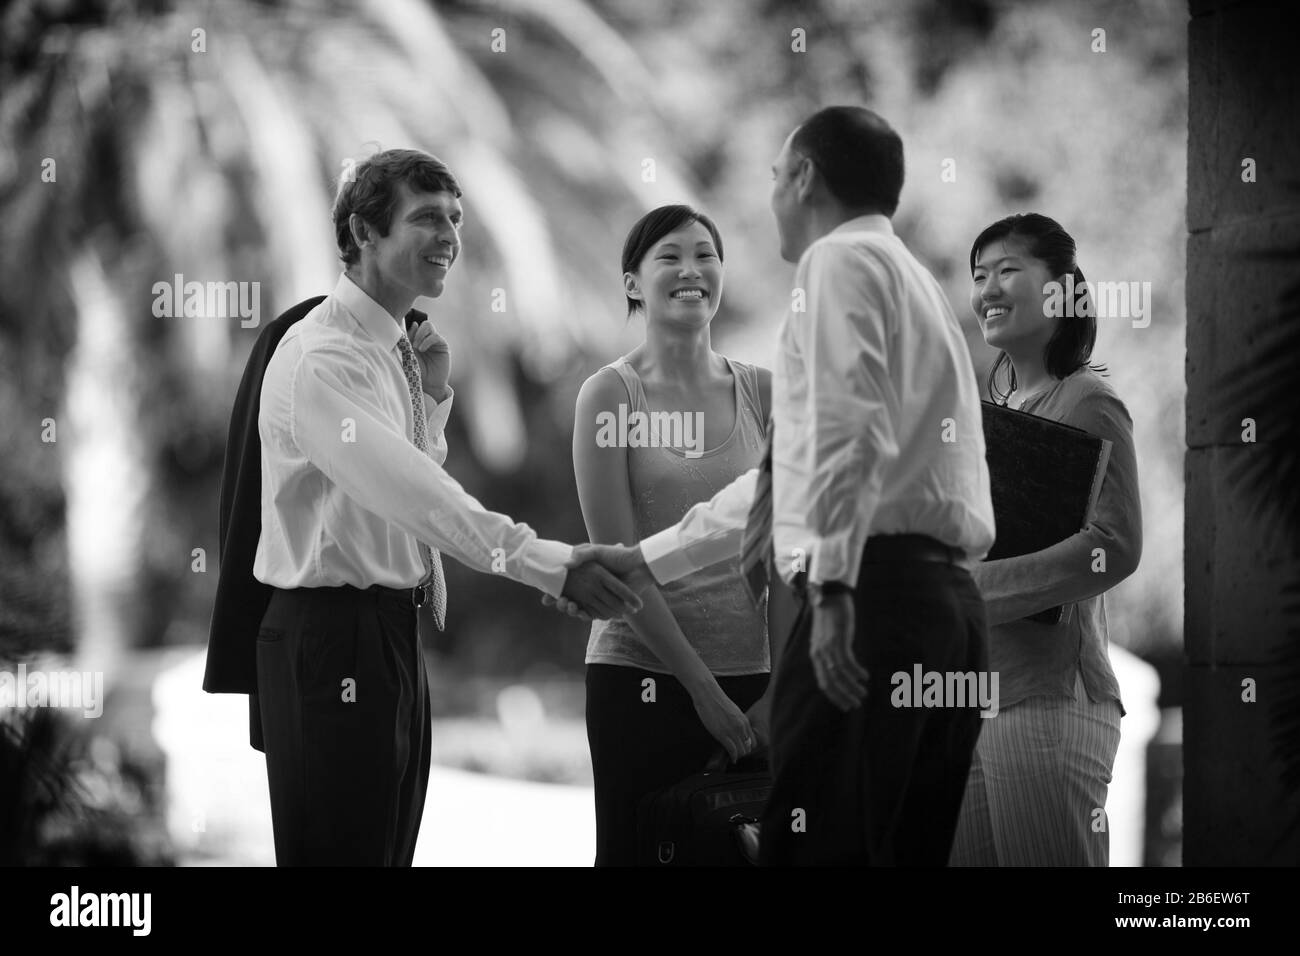 Business executives greet each other outside the building. Stock Photo